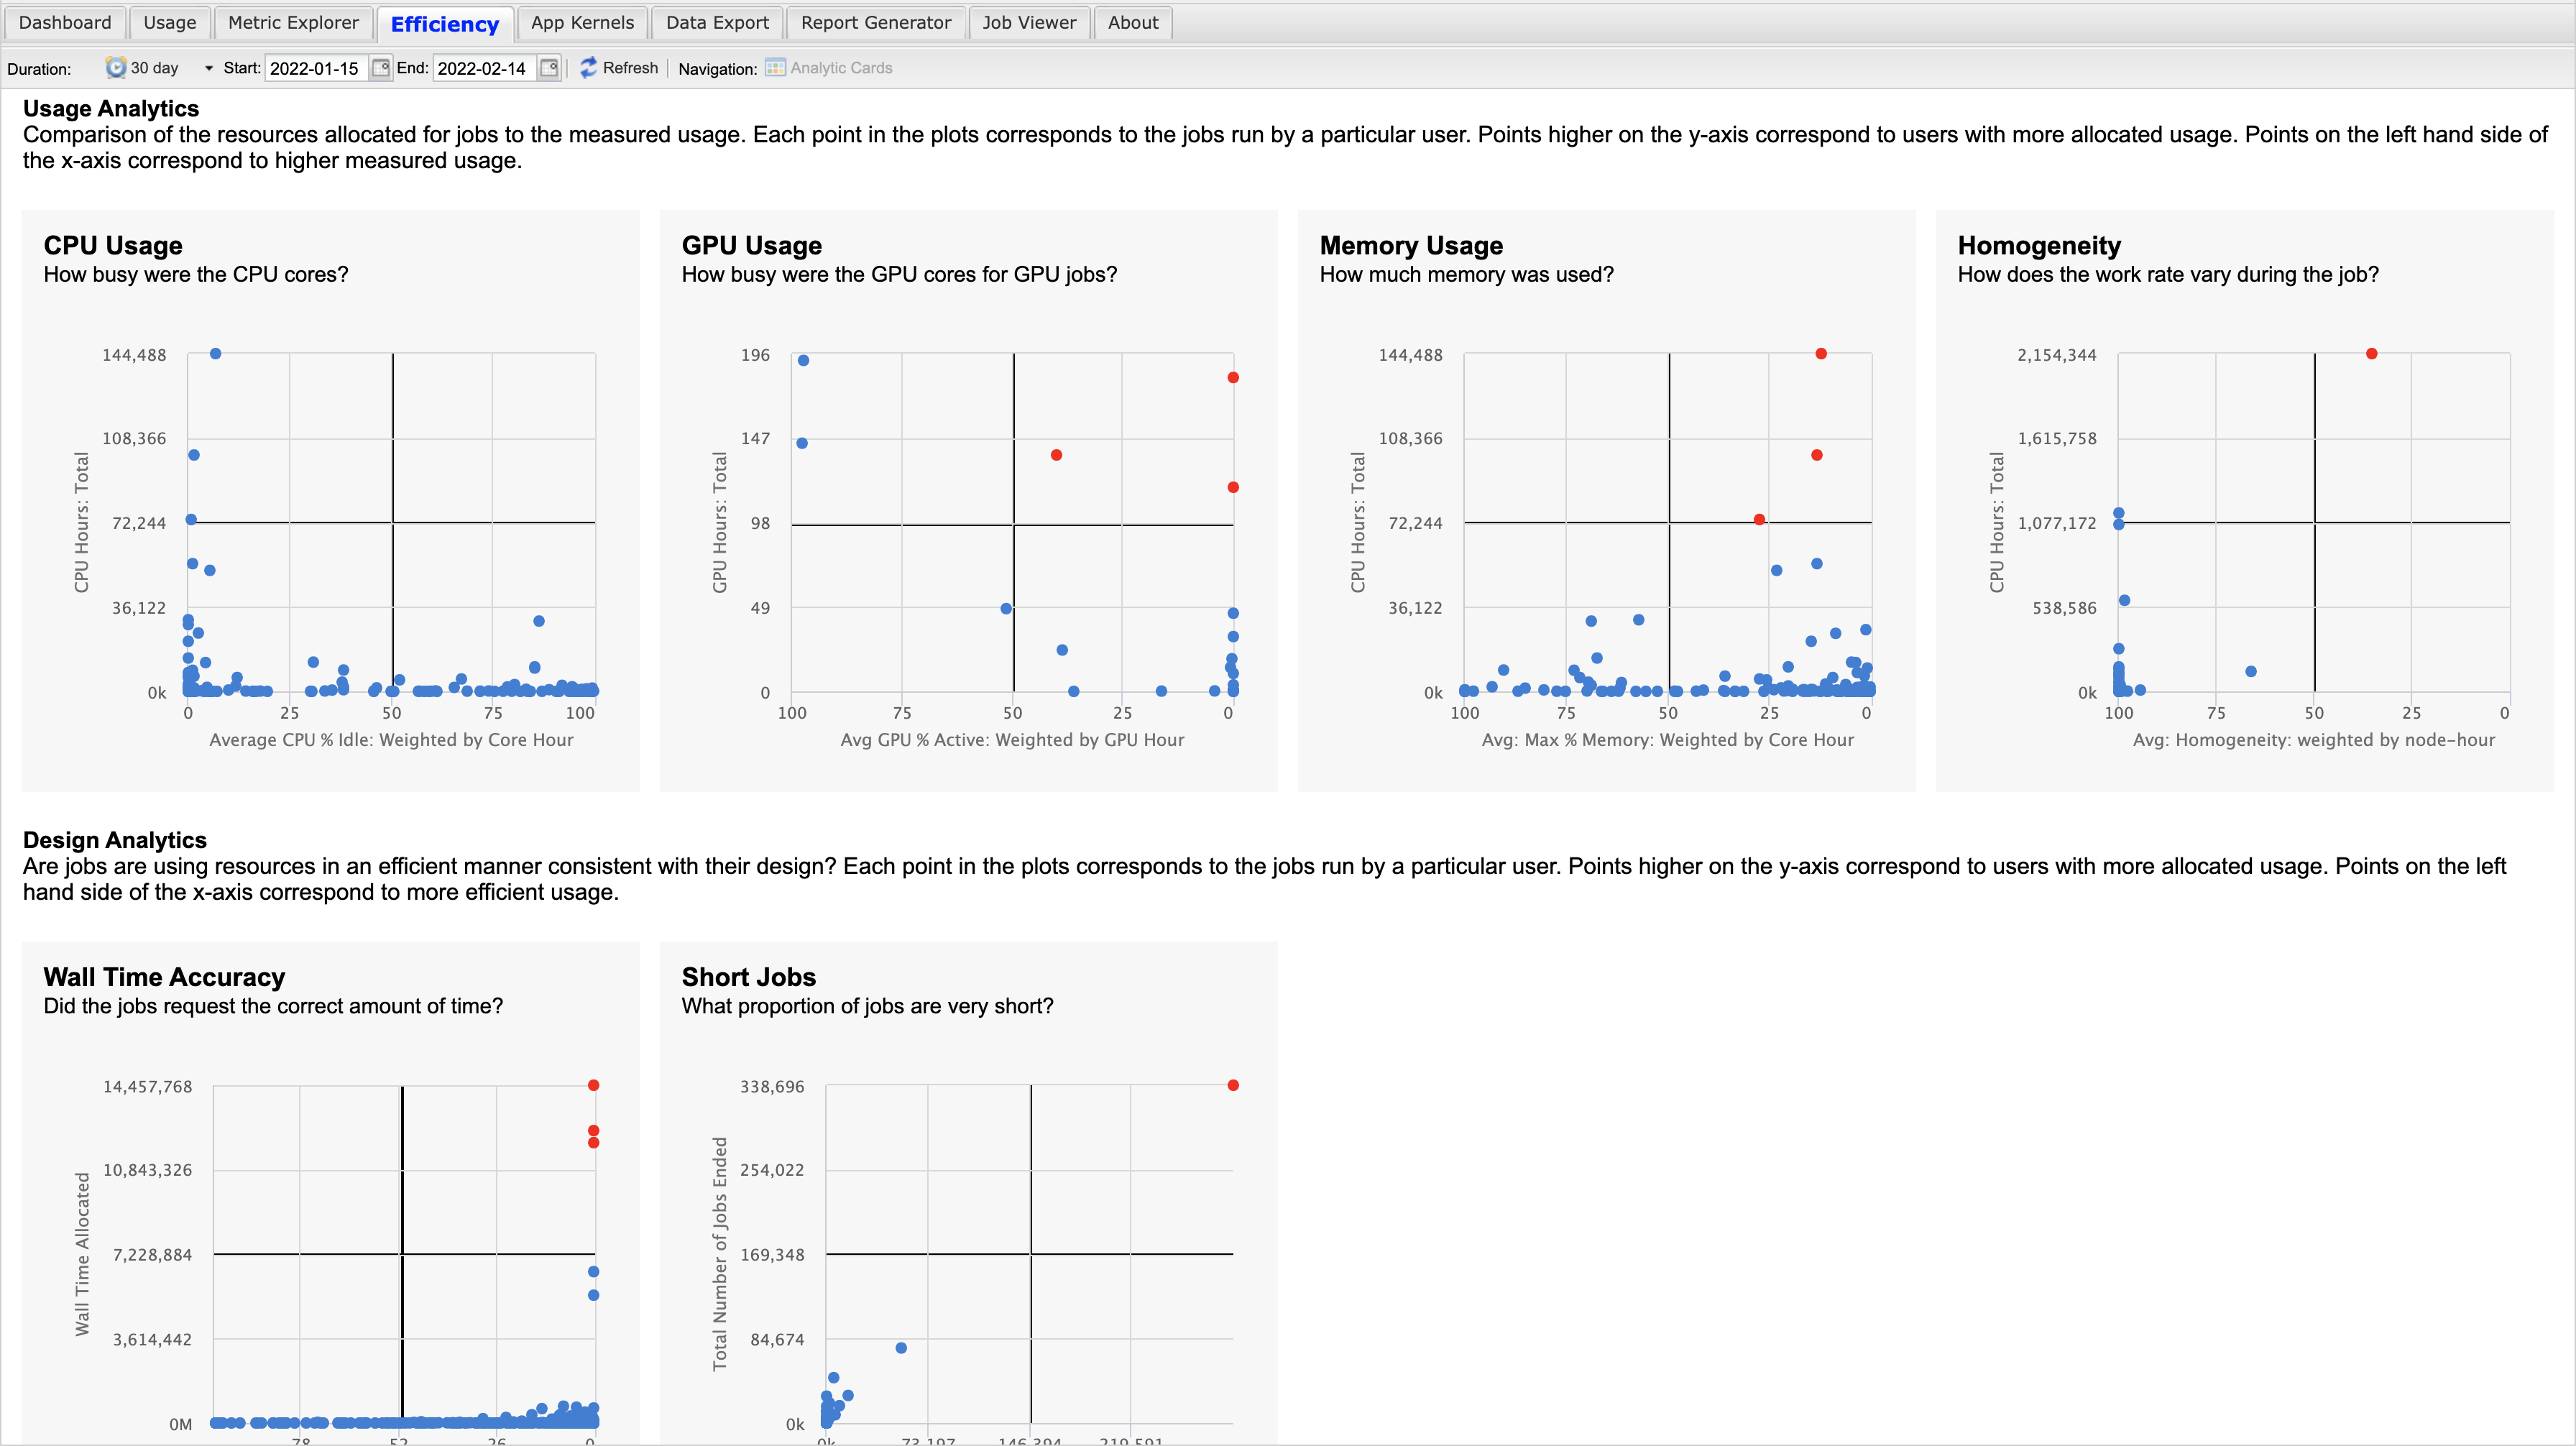 Screenshot of the initial view when first navigating to the efficiency tab. The view shows six cards broken down into two categories - one for usage analytics which includes CPU Usage, GPU Usage, Memory Usage and Homogeneity and one for design analytics which includes Wall Time Accuracy and Short Jobs. Each card displays a short description of the analytic and a thumbnail view of the scatter plot related to that analytic. The scatter plot points represent a user's usage on the resource and efficiency of their jobs for the specific analytic.